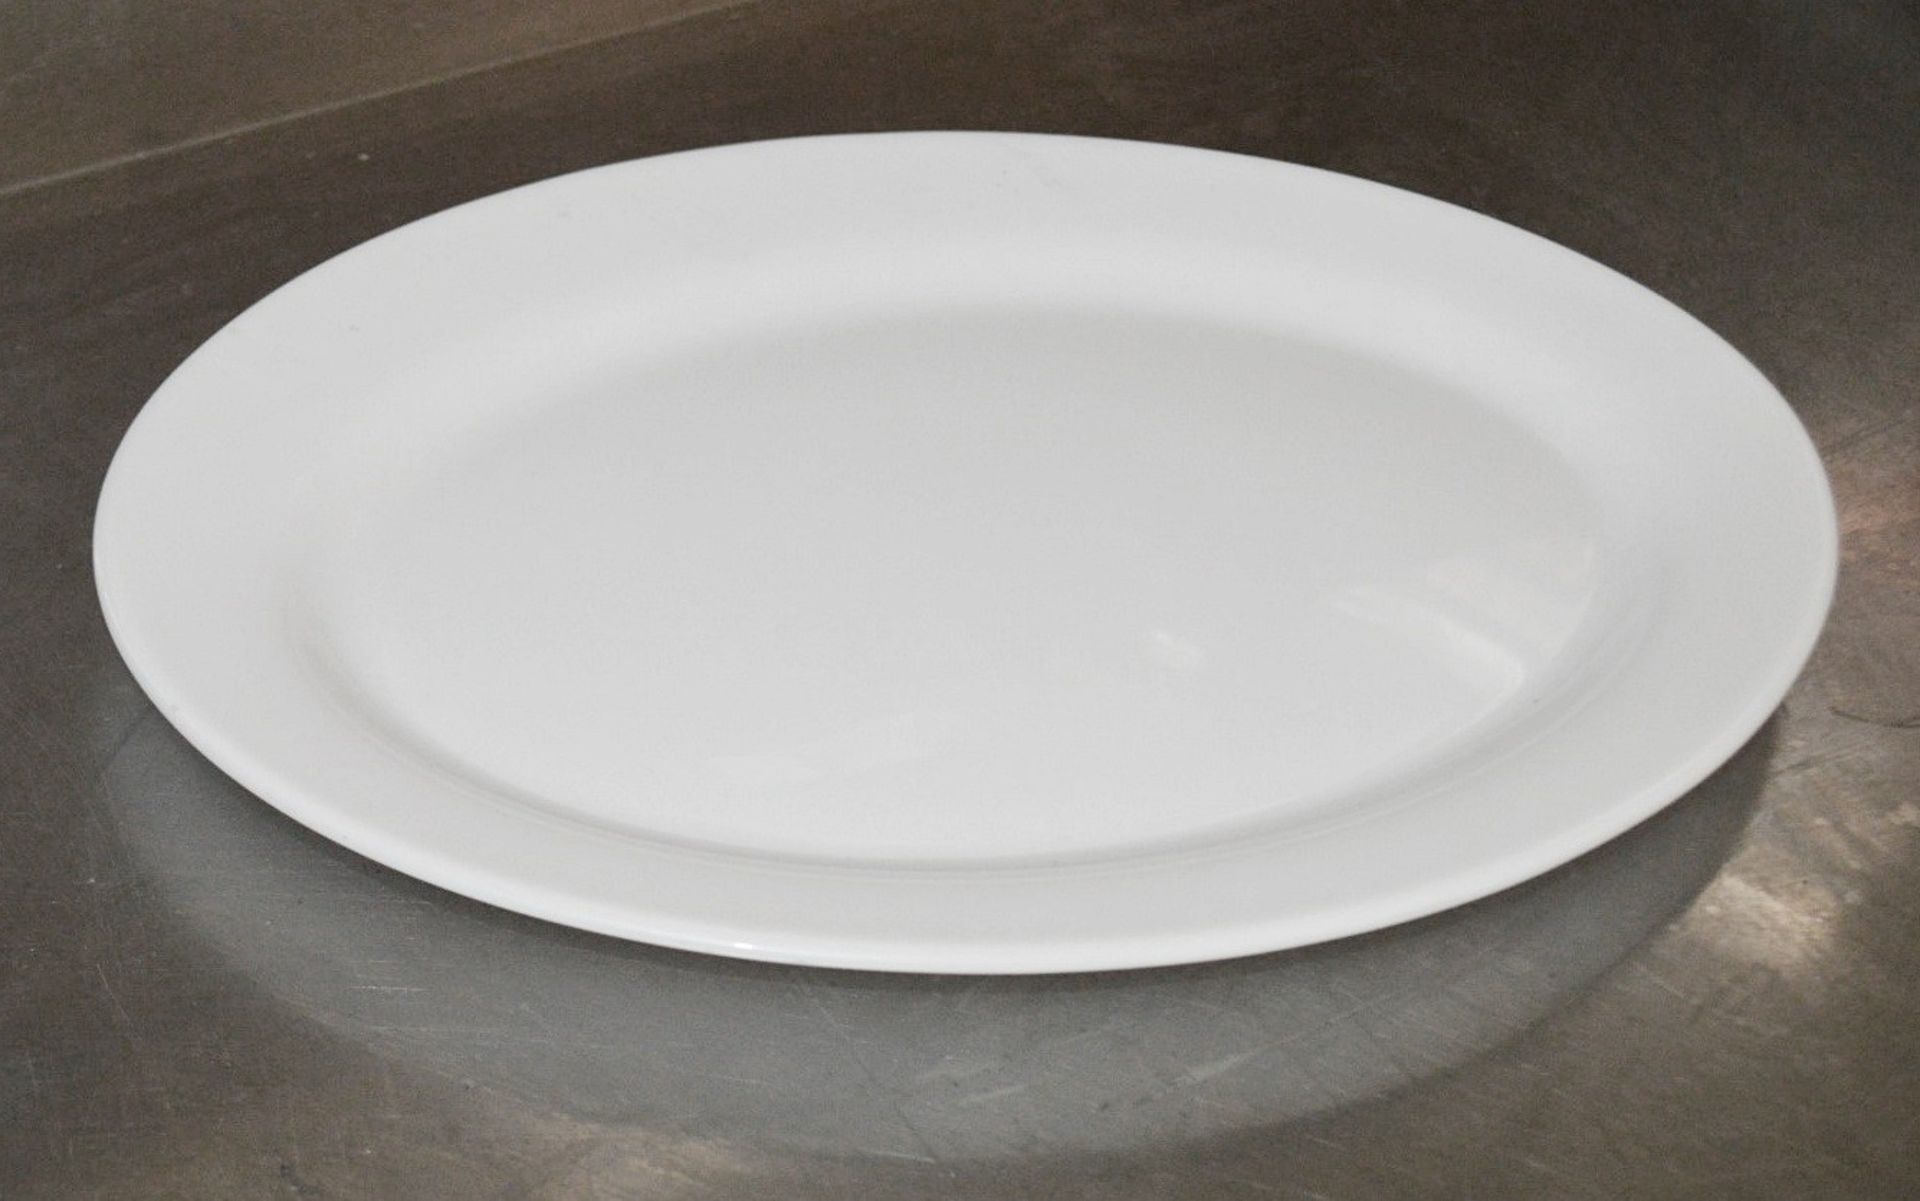 50 x Commercial Oval Dining Platter Plates - Dimensions: 31 x 23cm - Pre-owned, From A London - Image 3 of 4